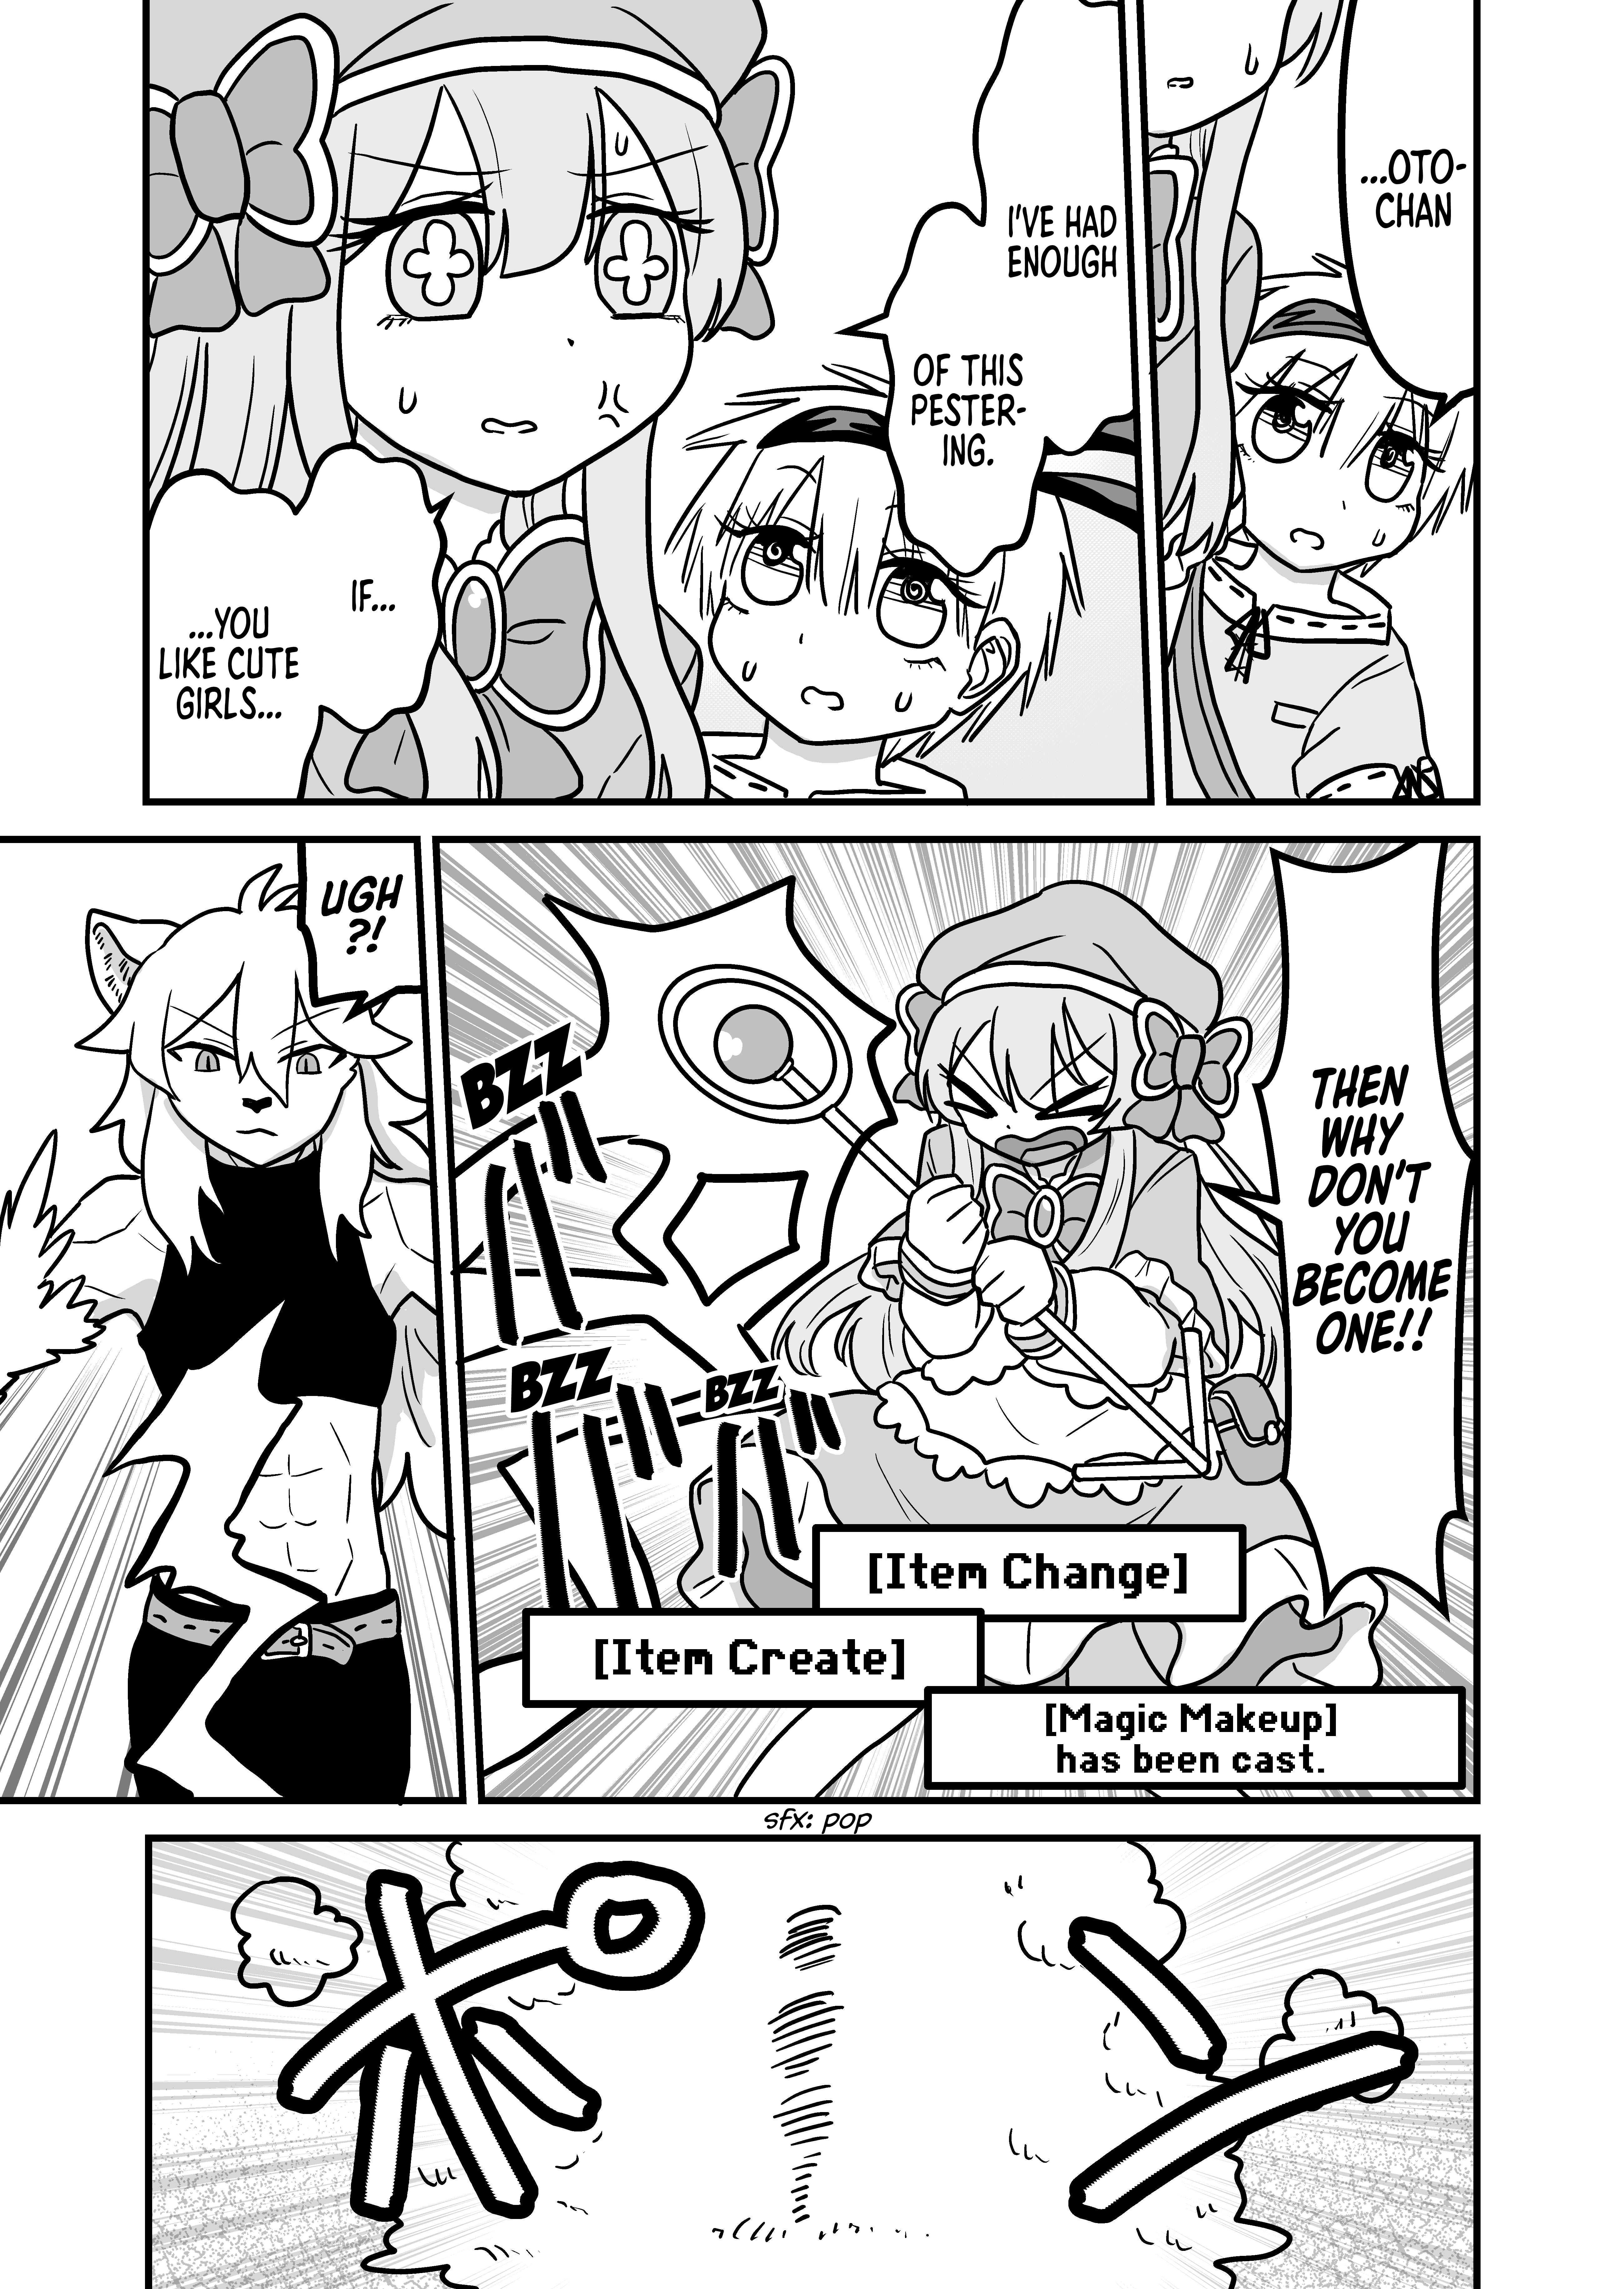 Crossdressing Quest - Page 2